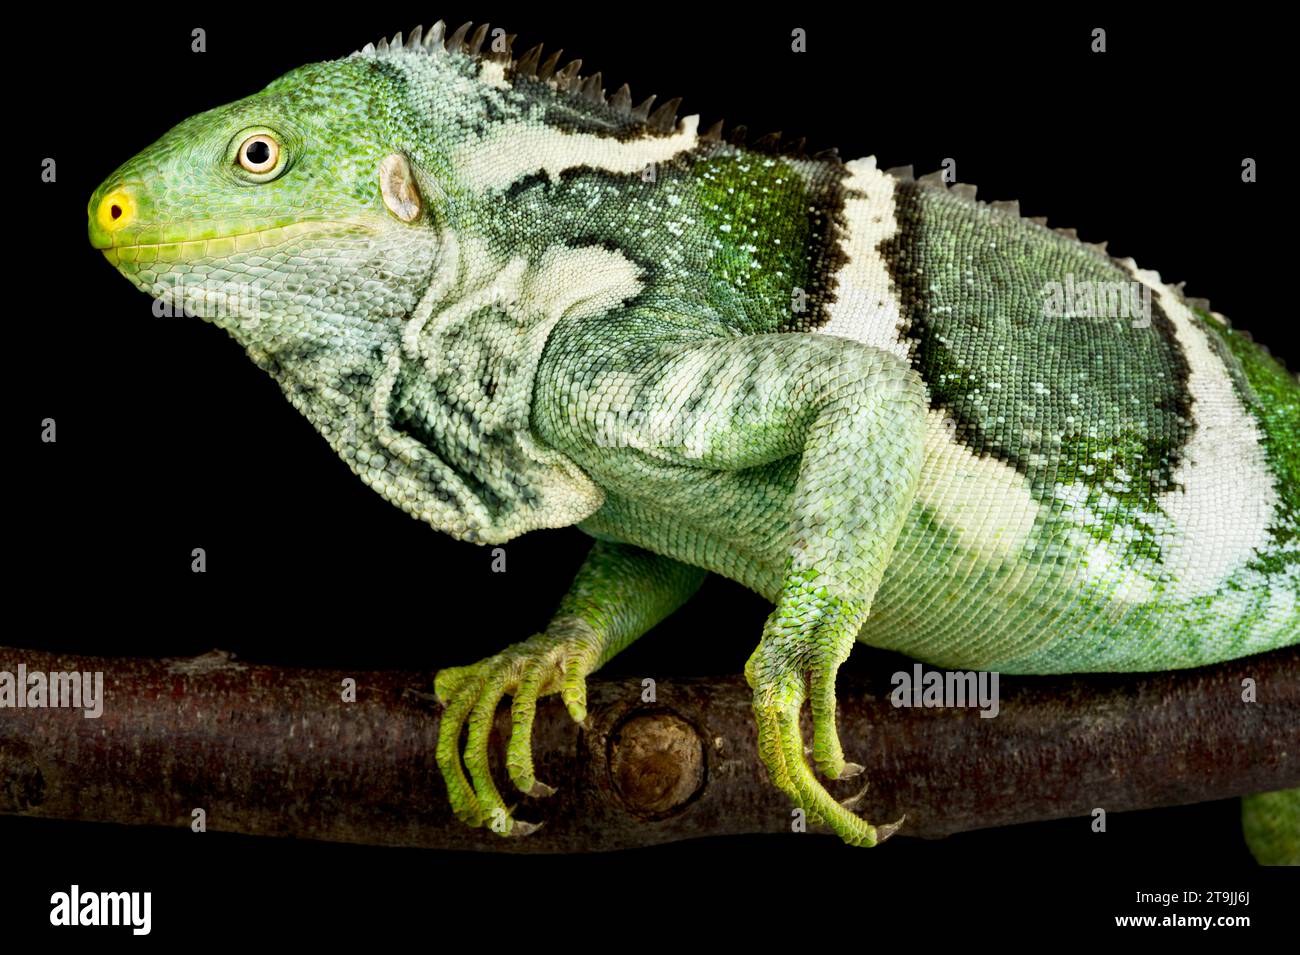 The Fiji Crested Iguana (Brachylophus vitiensis) is a critically endangered lizard species from the Fiji islands. Stock Photo